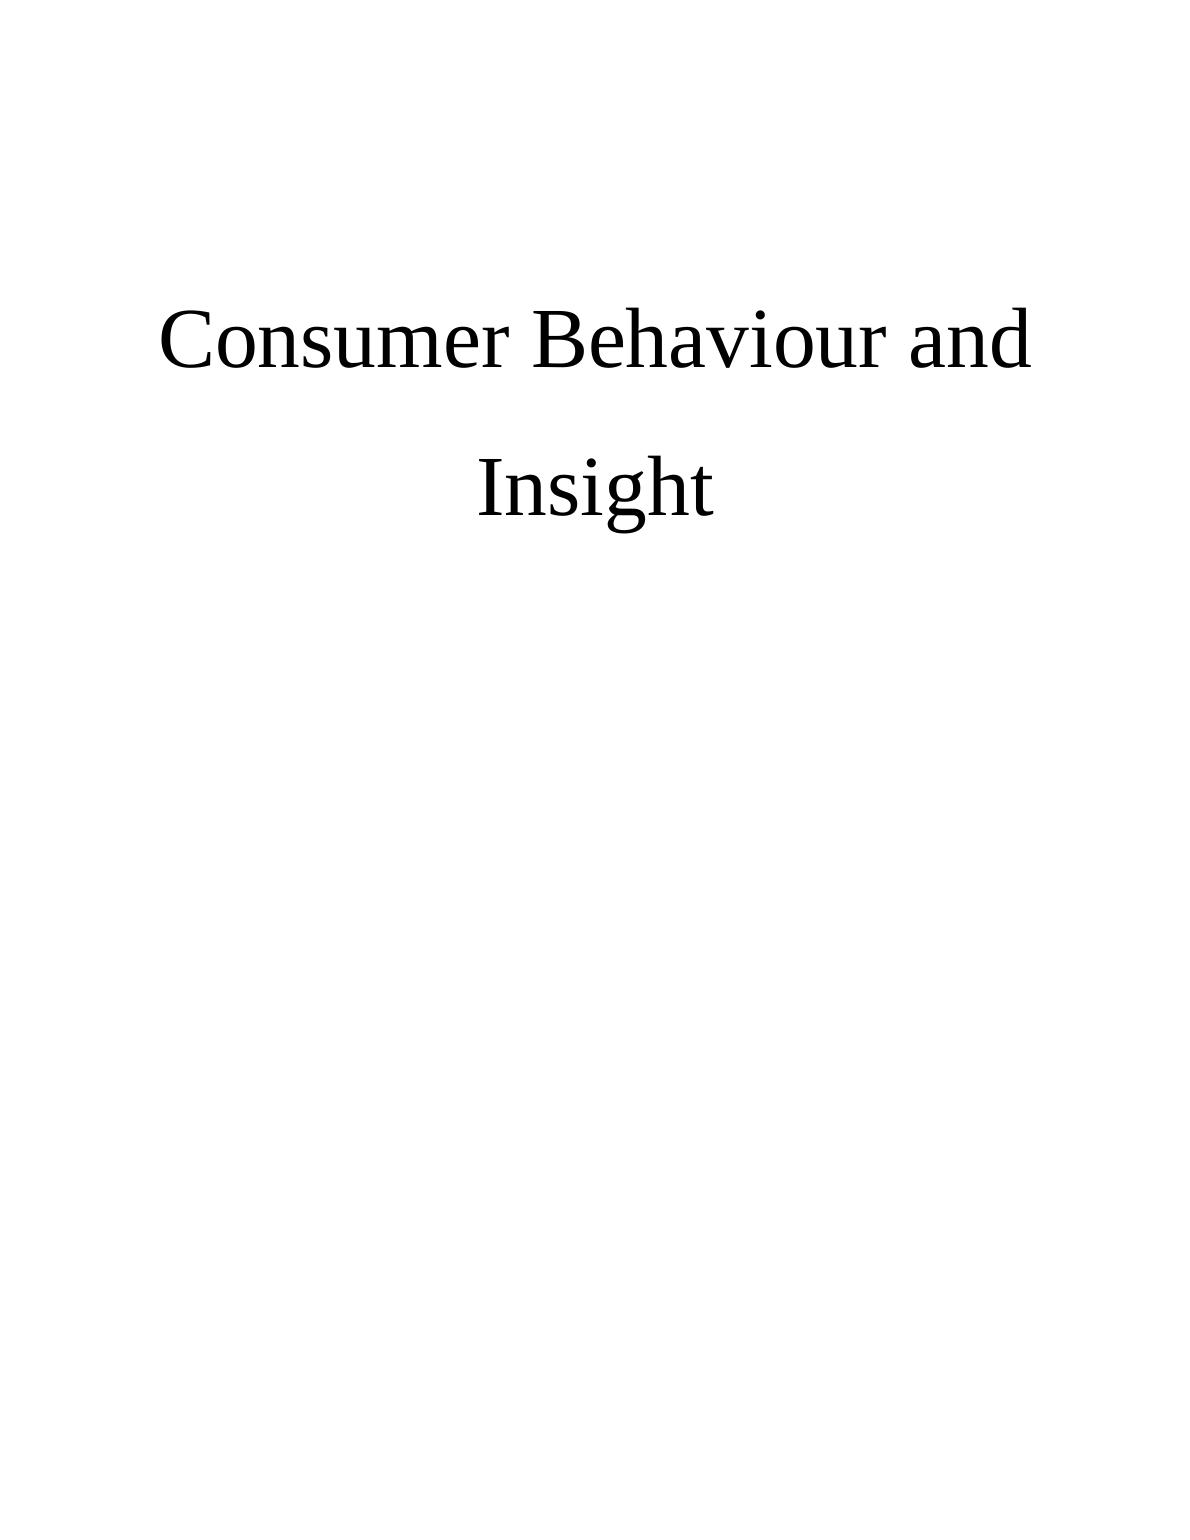 Consumer Behaviour and Insight Assignment Solved (Doc)_1